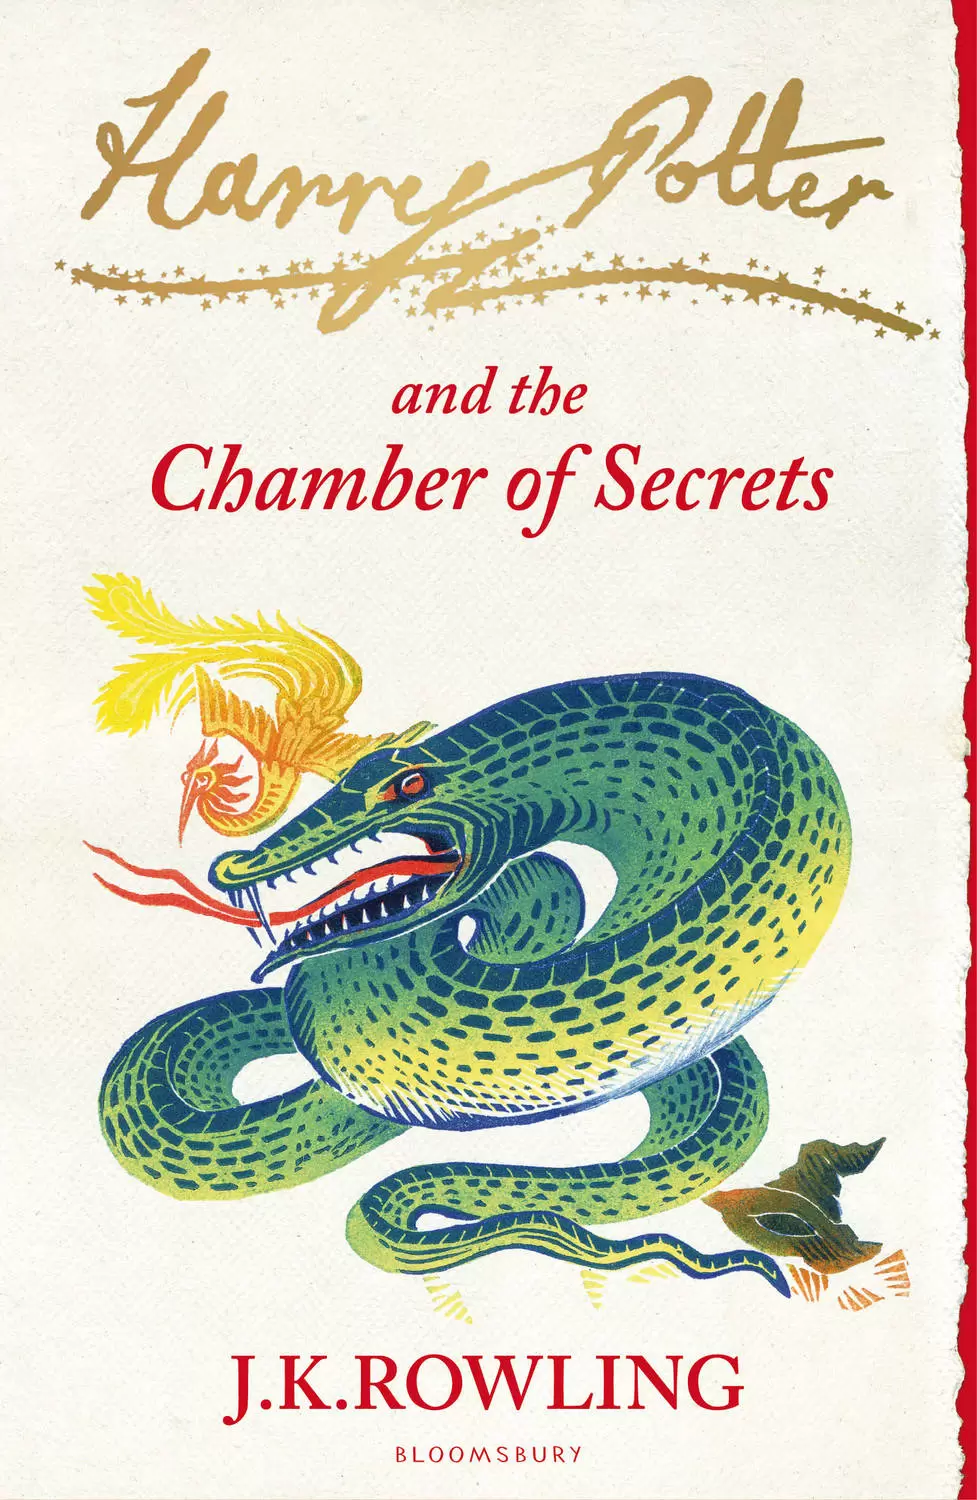 Livres Harry Potter et Animaux Fantastiques - Harry Potter and the Chamber of Secrets